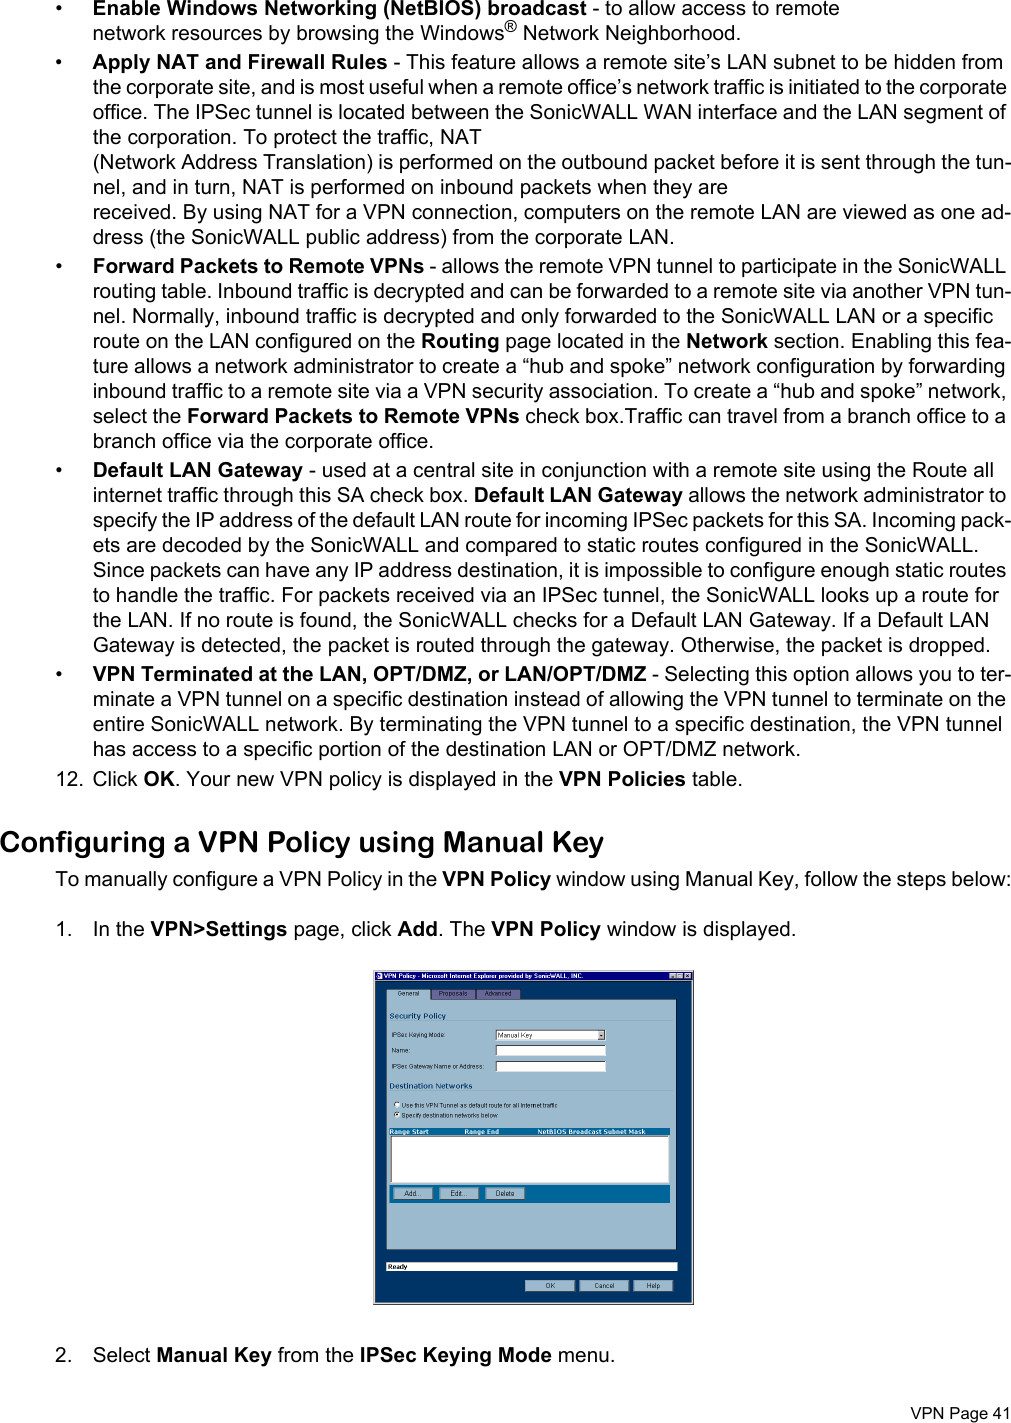  VPN Page 41•Enable Windows Networking (NetBIOS) broadcast - to allow access to remote network resources by browsing the Windows® Network Neighborhood. •Apply NAT and Firewall Rules - This feature allows a remote site’s LAN subnet to be hidden from the corporate site, and is most useful when a remote office’s network traffic is initiated to the corporate office. The IPSec tunnel is located between the SonicWALL WAN interface and the LAN segment of the corporation. To protect the traffic, NAT (Network Address Translation) is performed on the outbound packet before it is sent through the tun-nel, and in turn, NAT is performed on inbound packets when they are received. By using NAT for a VPN connection, computers on the remote LAN are viewed as one ad-dress (the SonicWALL public address) from the corporate LAN. •Forward Packets to Remote VPNs - allows the remote VPN tunnel to participate in the SonicWALL routing table. Inbound traffic is decrypted and can be forwarded to a remote site via another VPN tun-nel. Normally, inbound traffic is decrypted and only forwarded to the SonicWALL LAN or a specific route on the LAN configured on the Routing page located in the Network section. Enabling this fea-ture allows a network administrator to create a “hub and spoke” network configuration by forwarding inbound traffic to a remote site via a VPN security association. To create a “hub and spoke” network, select the Forward Packets to Remote VPNs check box.Traffic can travel from a branch office to a branch office via the corporate office. •Default LAN Gateway - used at a central site in conjunction with a remote site using the Route all internet traffic through this SA check box. Default LAN Gateway allows the network administrator to specify the IP address of the default LAN route for incoming IPSec packets for this SA. Incoming pack-ets are decoded by the SonicWALL and compared to static routes configured in the SonicWALL. Since packets can have any IP address destination, it is impossible to configure enough static routes to handle the traffic. For packets received via an IPSec tunnel, the SonicWALL looks up a route for the LAN. If no route is found, the SonicWALL checks for a Default LAN Gateway. If a Default LAN Gateway is detected, the packet is routed through the gateway. Otherwise, the packet is dropped. •VPN Terminated at the LAN, OPT/DMZ, or LAN/OPT/DMZ - Selecting this option allows you to ter-minate a VPN tunnel on a specific destination instead of allowing the VPN tunnel to terminate on the entire SonicWALL network. By terminating the VPN tunnel to a specific destination, the VPN tunnel has access to a specific portion of the destination LAN or OPT/DMZ network. 12. Click OK. Your new VPN policy is displayed in the VPN Policies table.Configuring a VPN Policy using Manual KeyTo manually configure a VPN Policy in the VPN Policy window using Manual Key, follow the steps below:1. In the VPN&gt;Settings page, click Add. The VPN Policy window is displayed. 2. Select Manual Key from the IPSec Keying Mode menu.